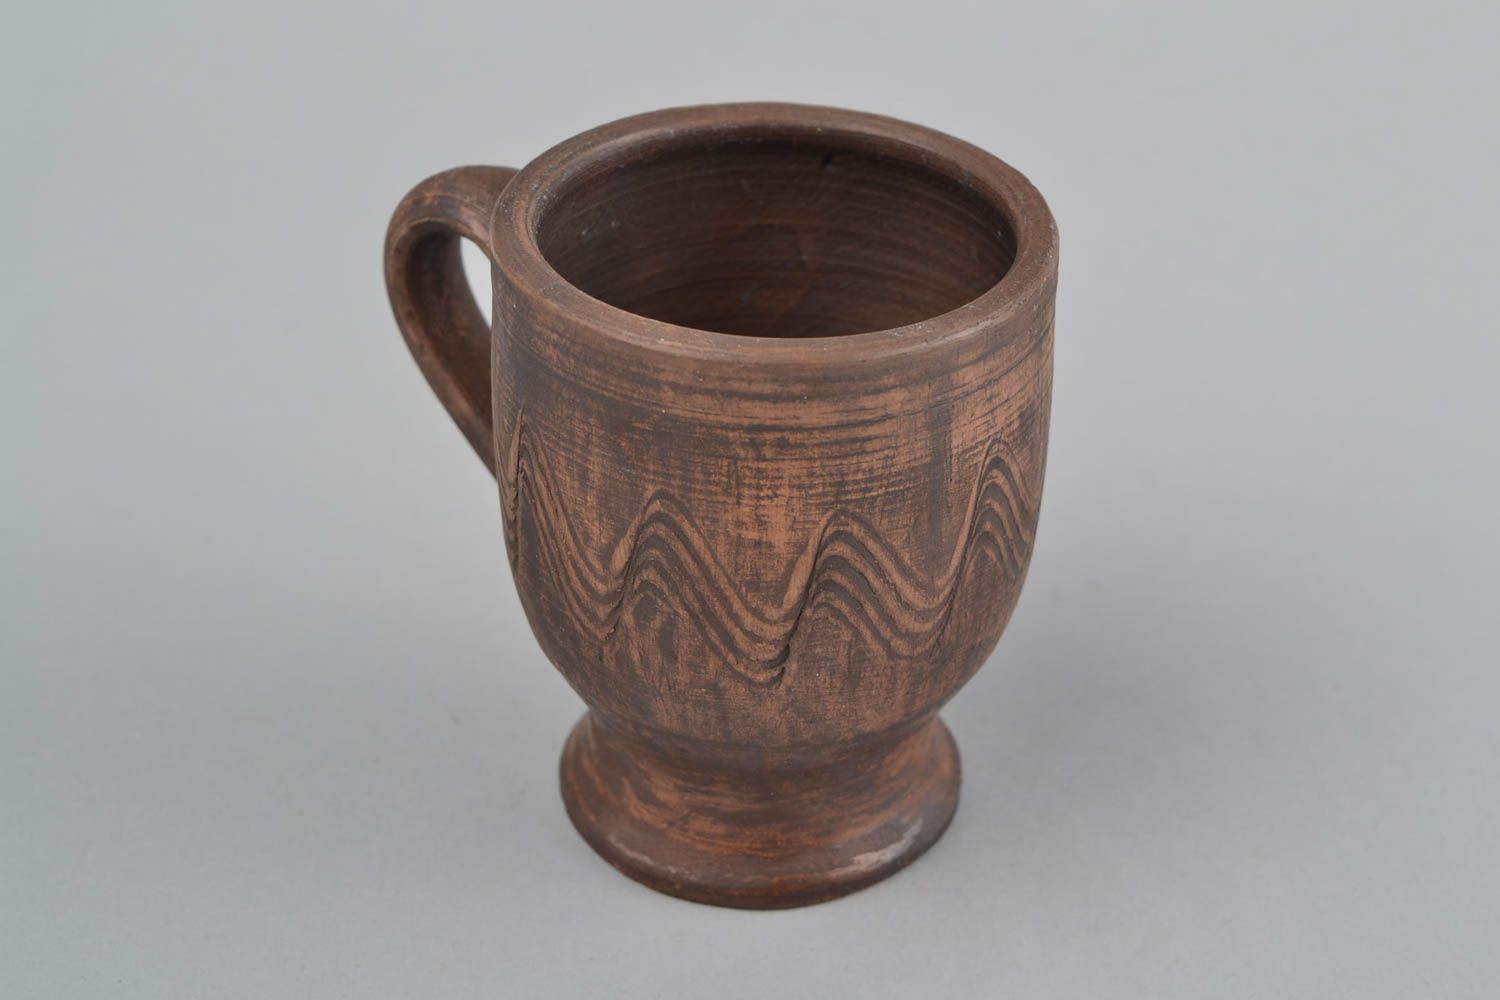 5 oz clay brown ceramic drinking cup on stand with handle and rustic style photo 3